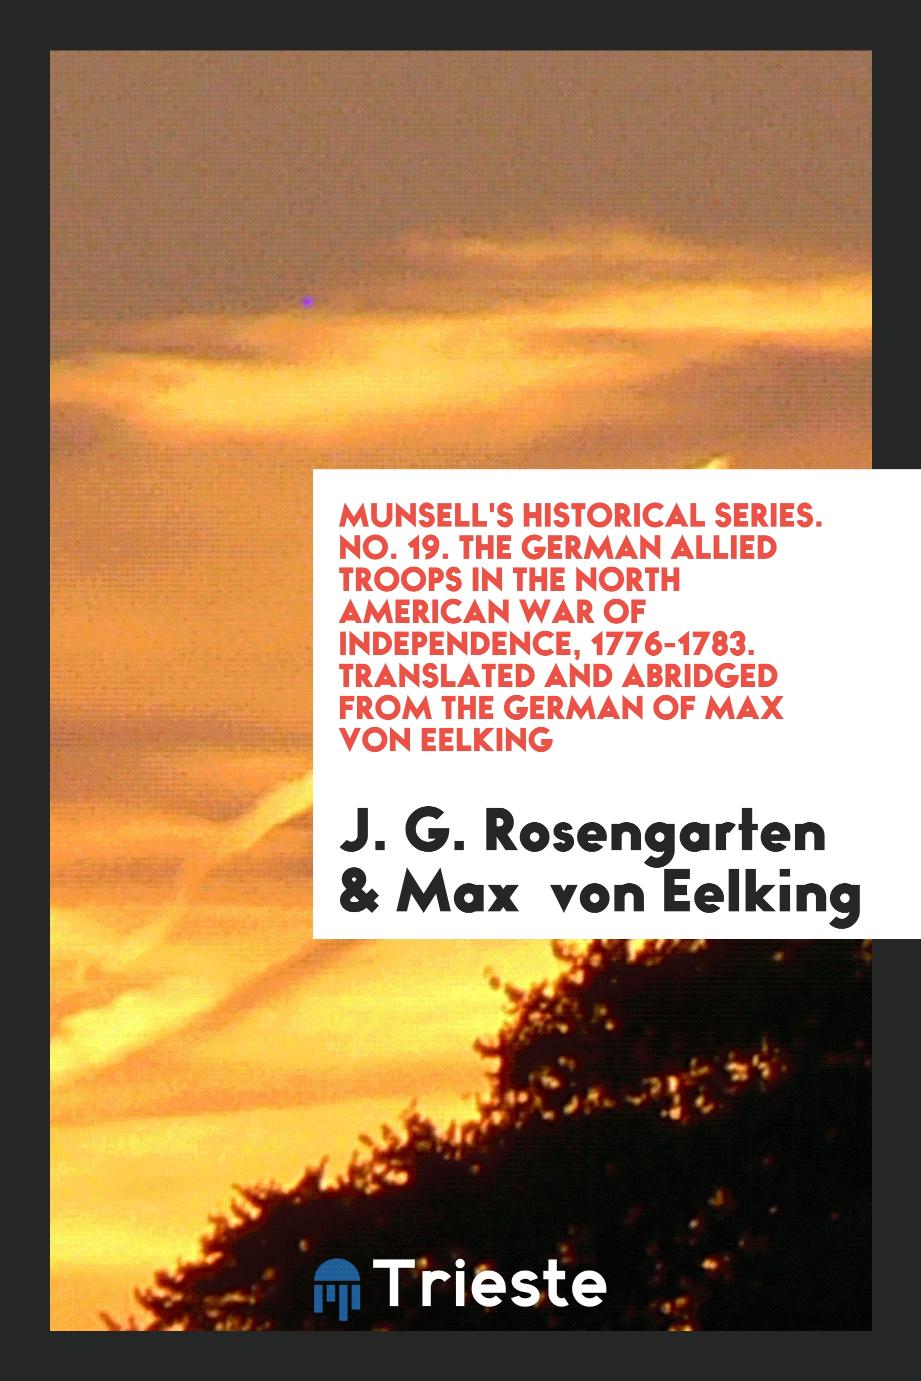 Munsell's Historical Series. No. 19. The German Allied Troops in the North American War of Independence, 1776-1783. Translated and Abridged from the German of Max von Eelking